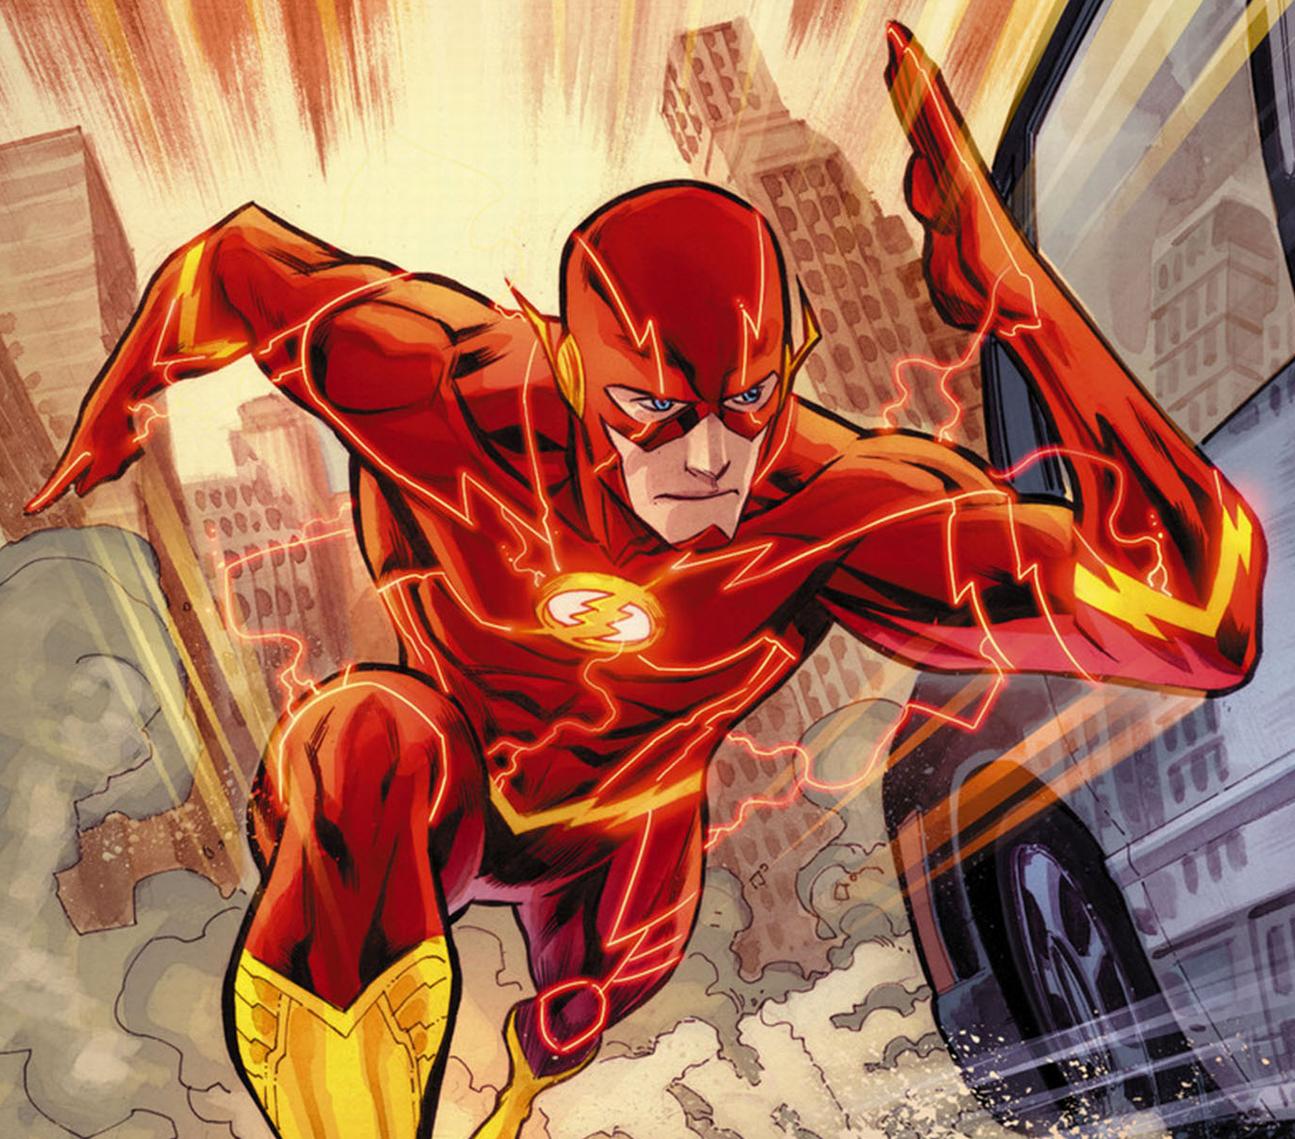 Abilities We Want Barry Allen To Use On The Flash